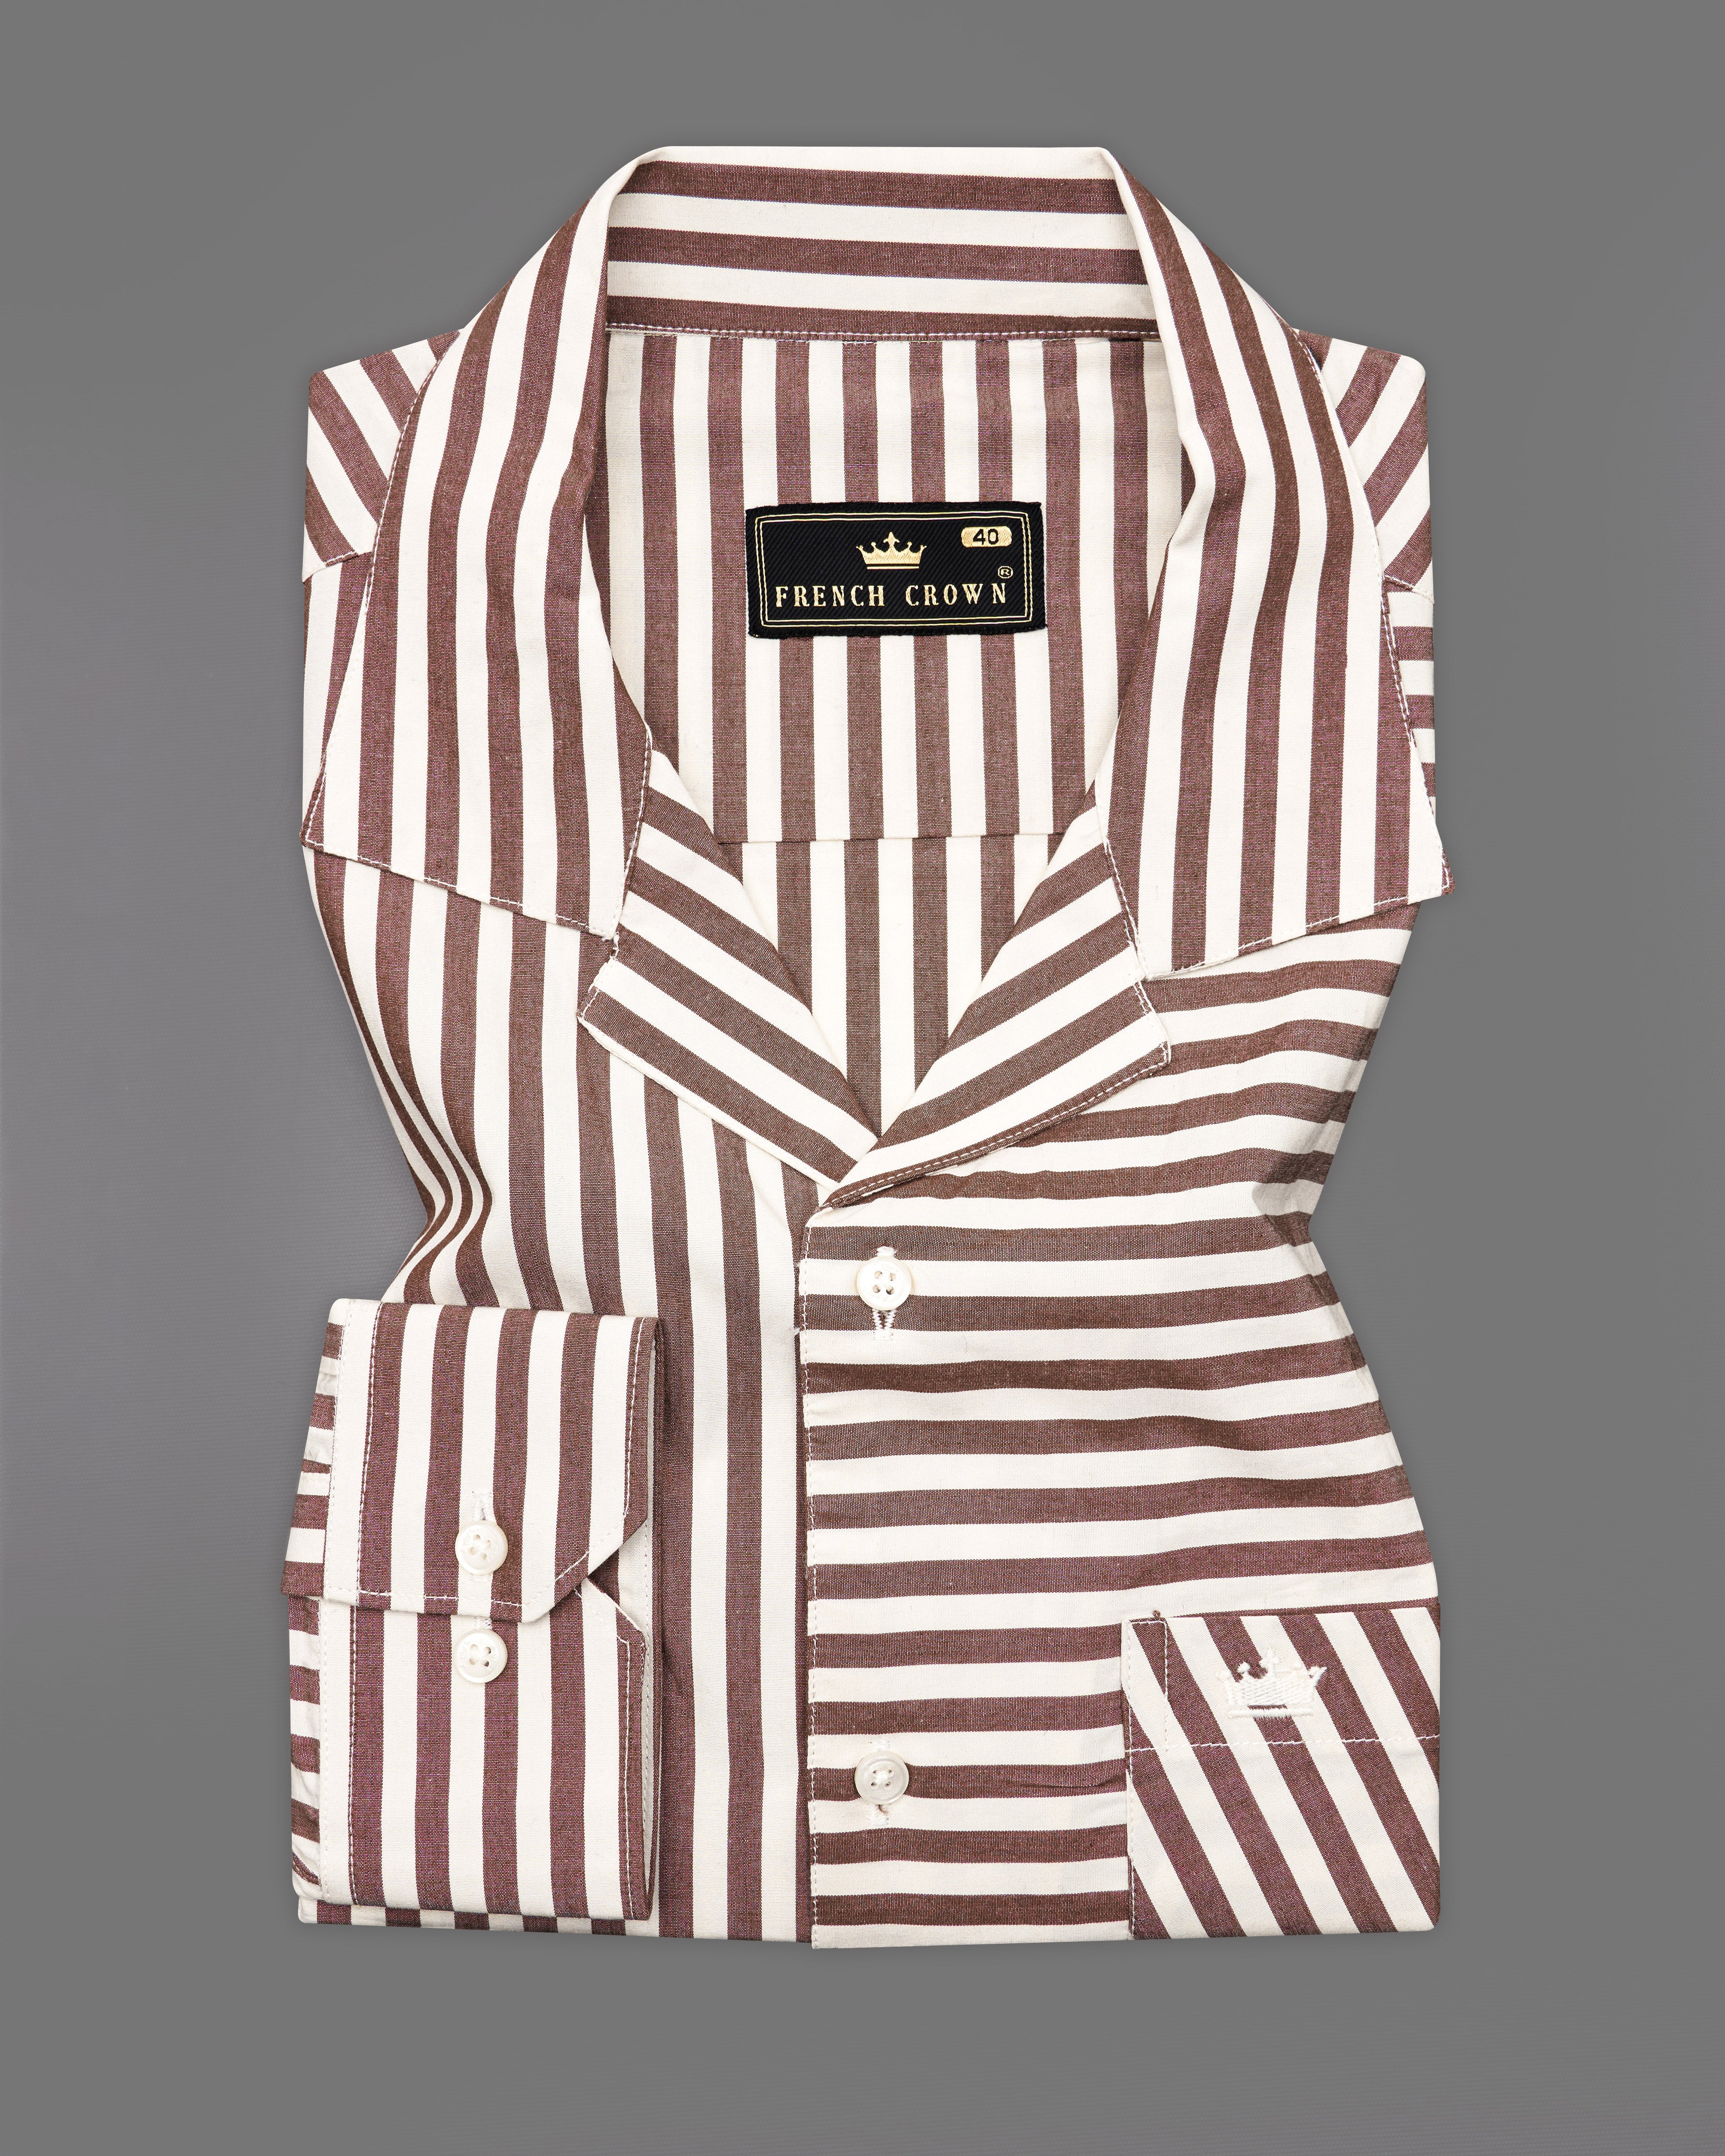 Millbrook Brown and White Striped Premium Cotton Designer Shirt 9854-CC-38, 9854-CC-H-38, 9854-CC-39, 9854-CC-H-39, 9854-CC-40, 9854-CC-H-40, 9854-CC-42, 9854-CC-H-42, 9854-CC-44, 9854-CC-H-44, 9854-CC-46, 9854-CC-H-46, 9854-CC-48, 9854-CC-H-48, 9854-CC-50, 9854-CC-H-50, 9854-CC-52, 9854-CC-H-52